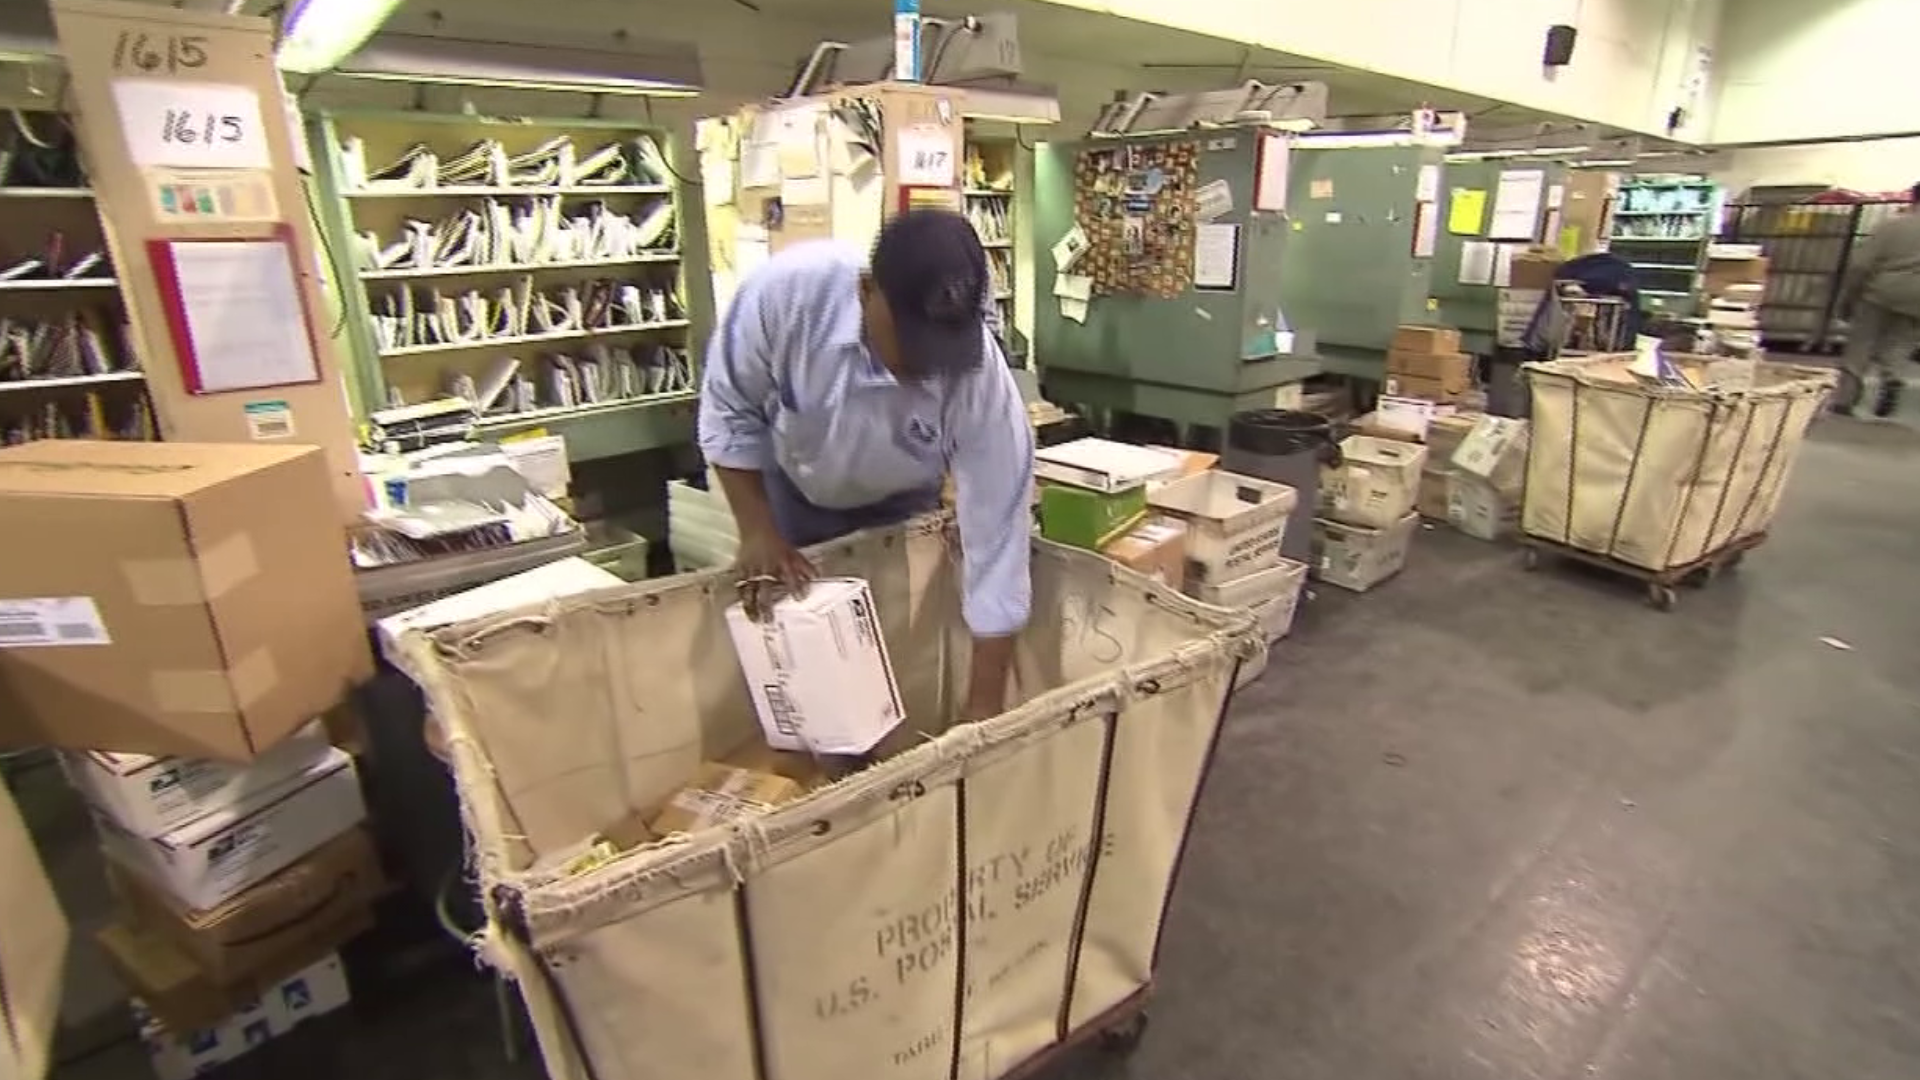 One business is facing week-long delays on packages.